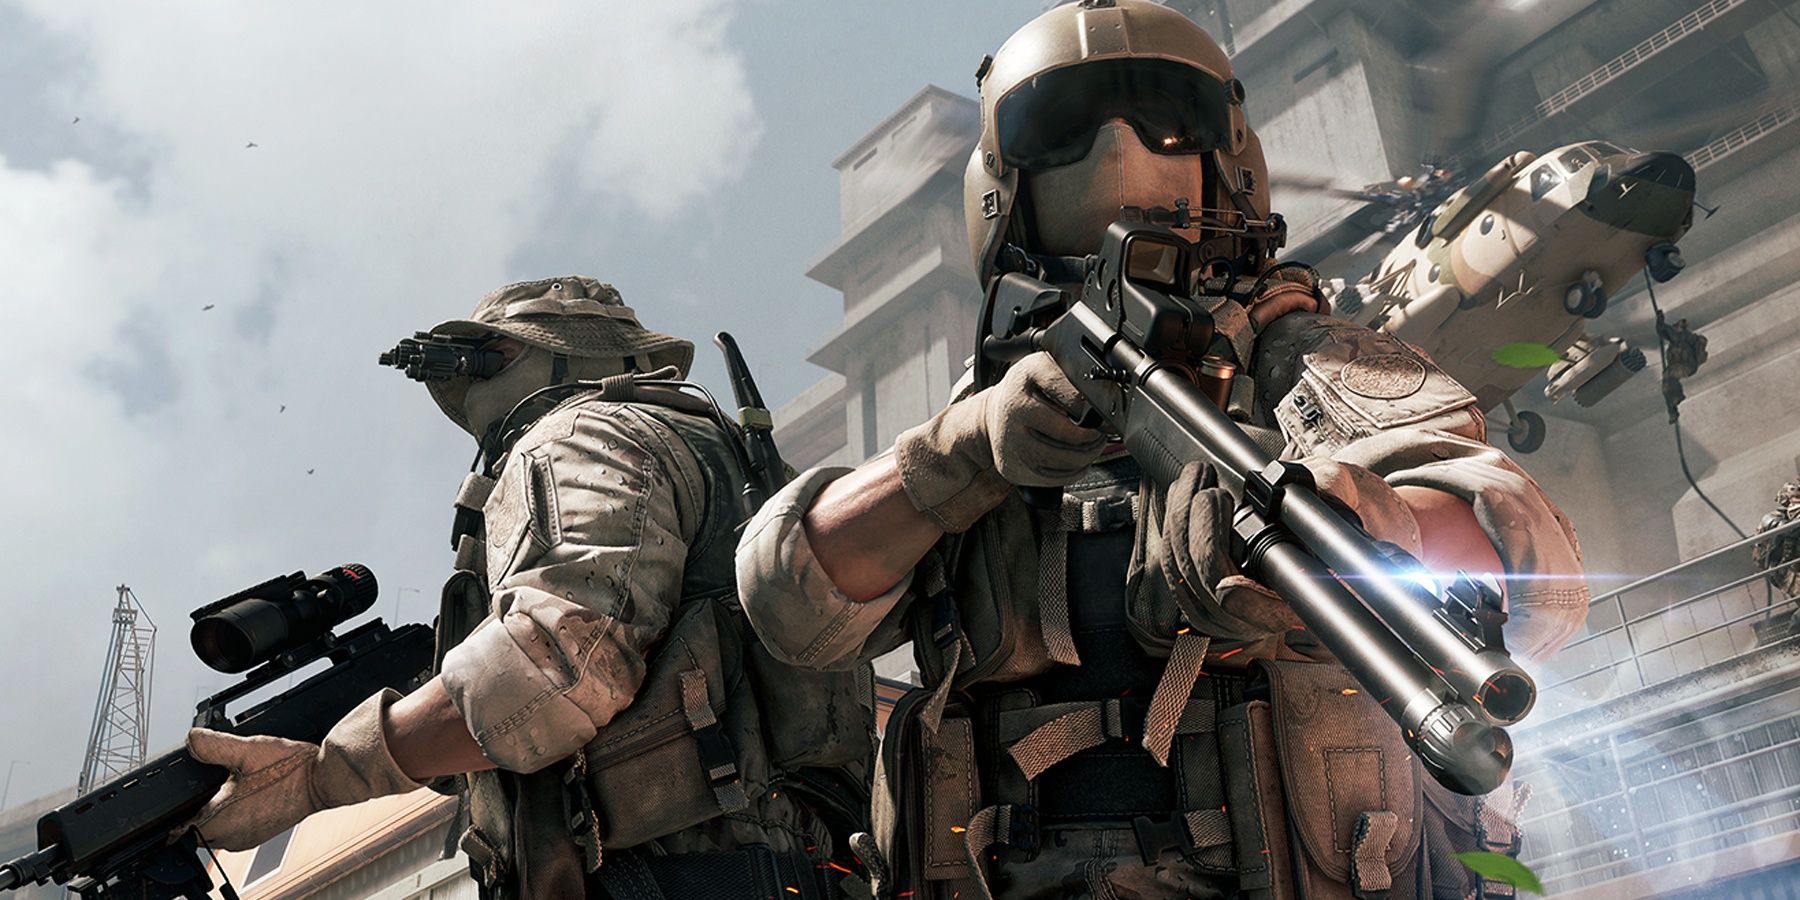 Battlefield 2042 is free for the weekend on Steam with a trial event